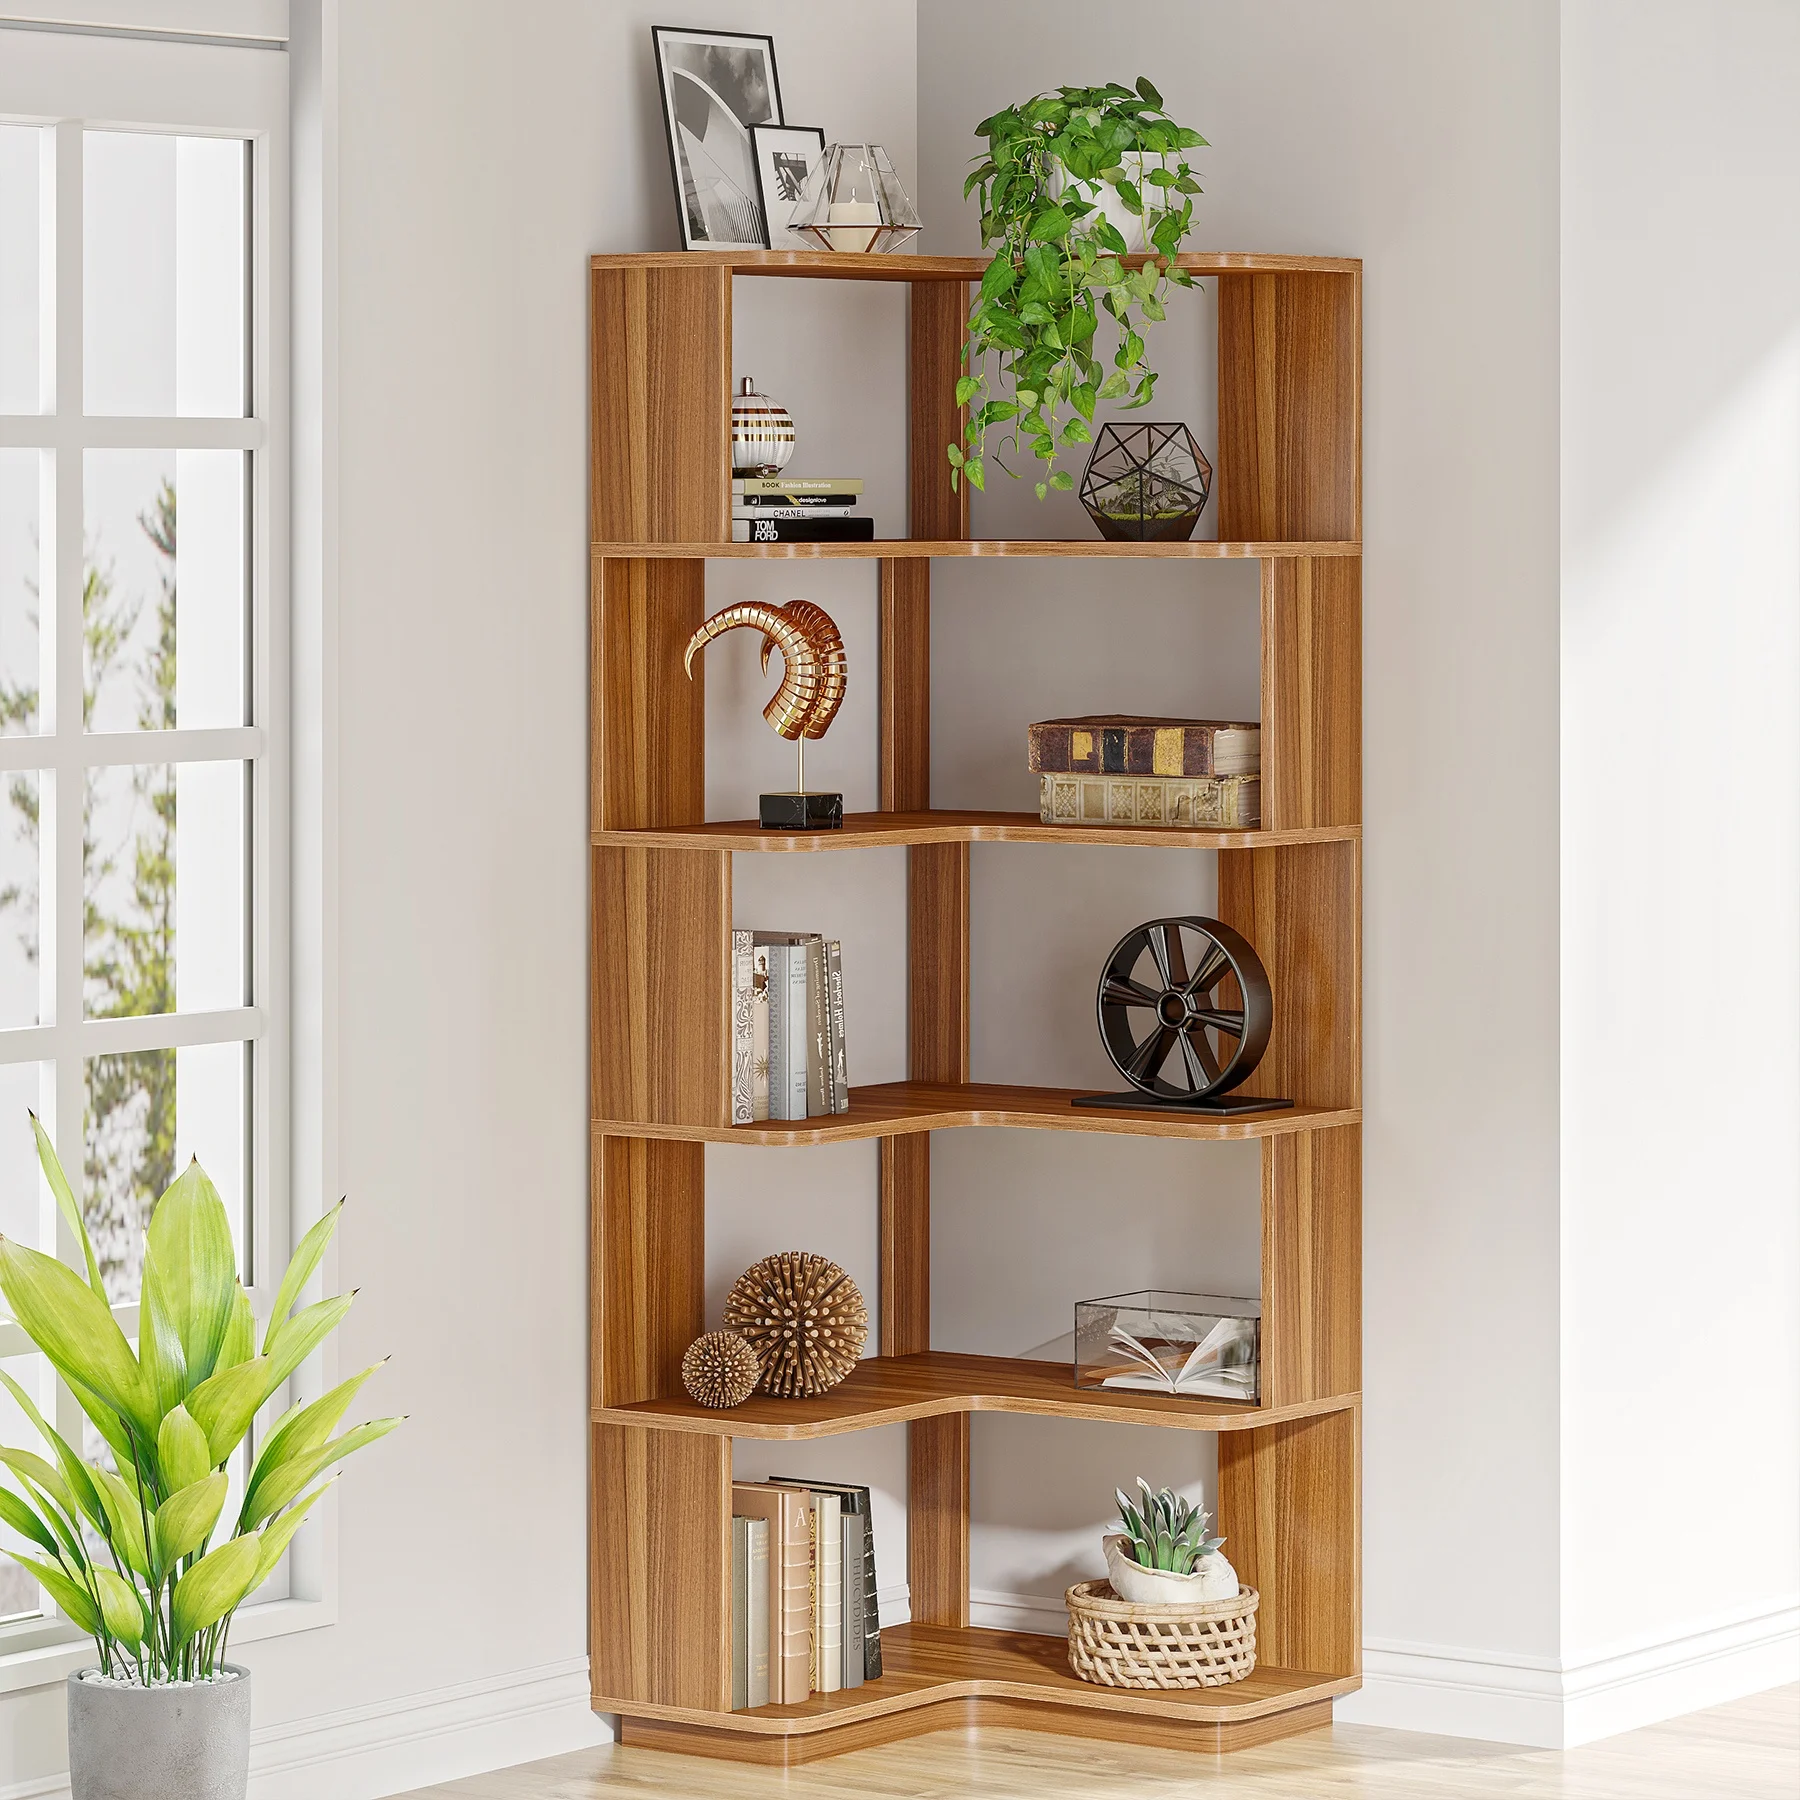 Freestanding Wood 6 Tier 64.9 Inch Tall Industrial Corner Bookcase with Display Rack Storage Organizer for Home Living Room